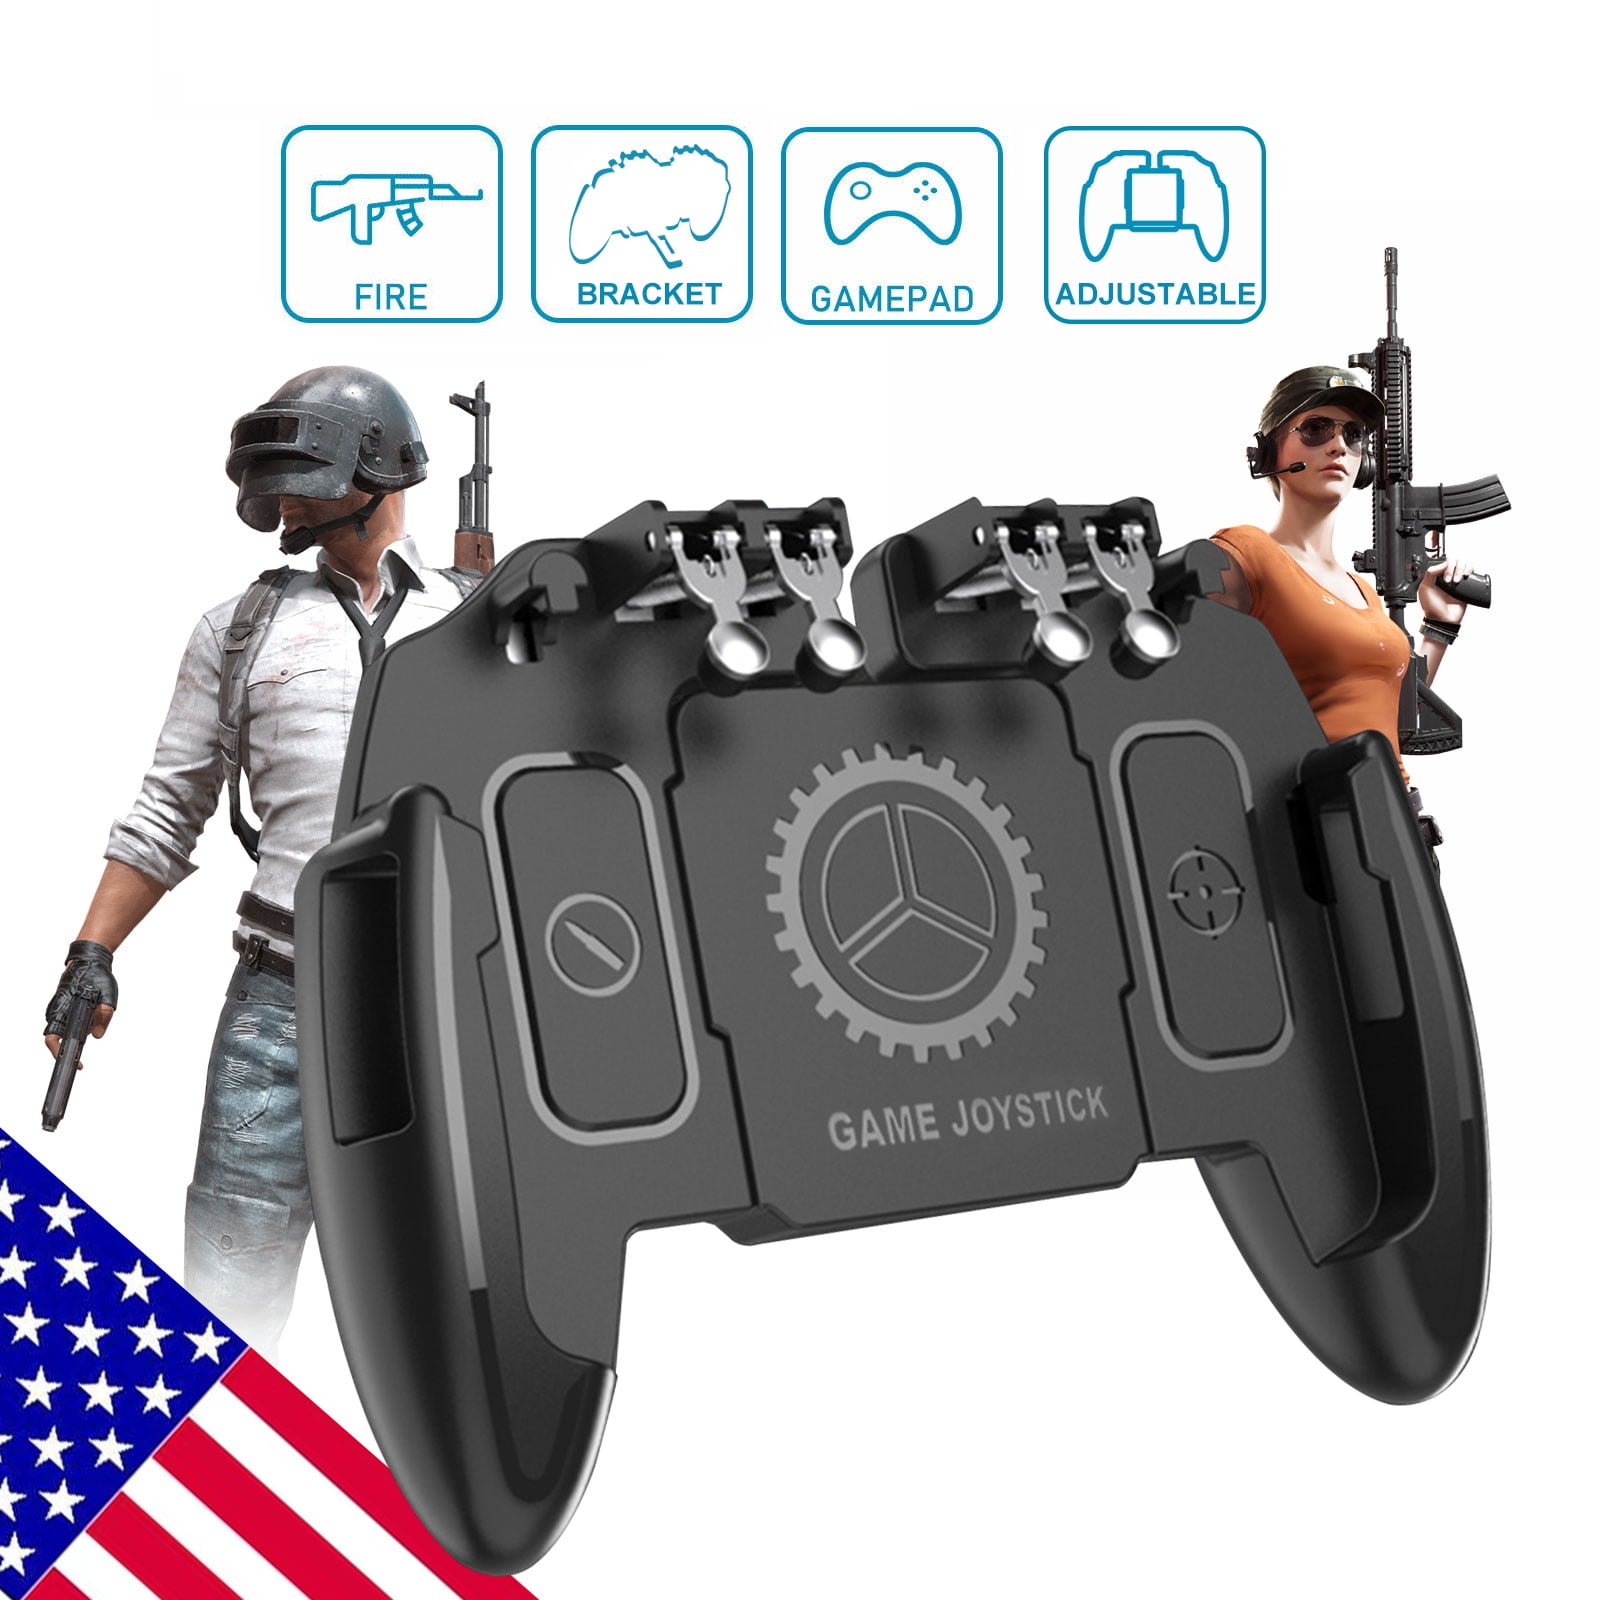 Get Triggered for Android or iOS, Carry Case for PUBG/Fortnite/Rules of Survival 2018 Upgraded Version V4 Shoot and Aim Sensitive L1R1 Shooter Controller Mobile Gaming Triggers